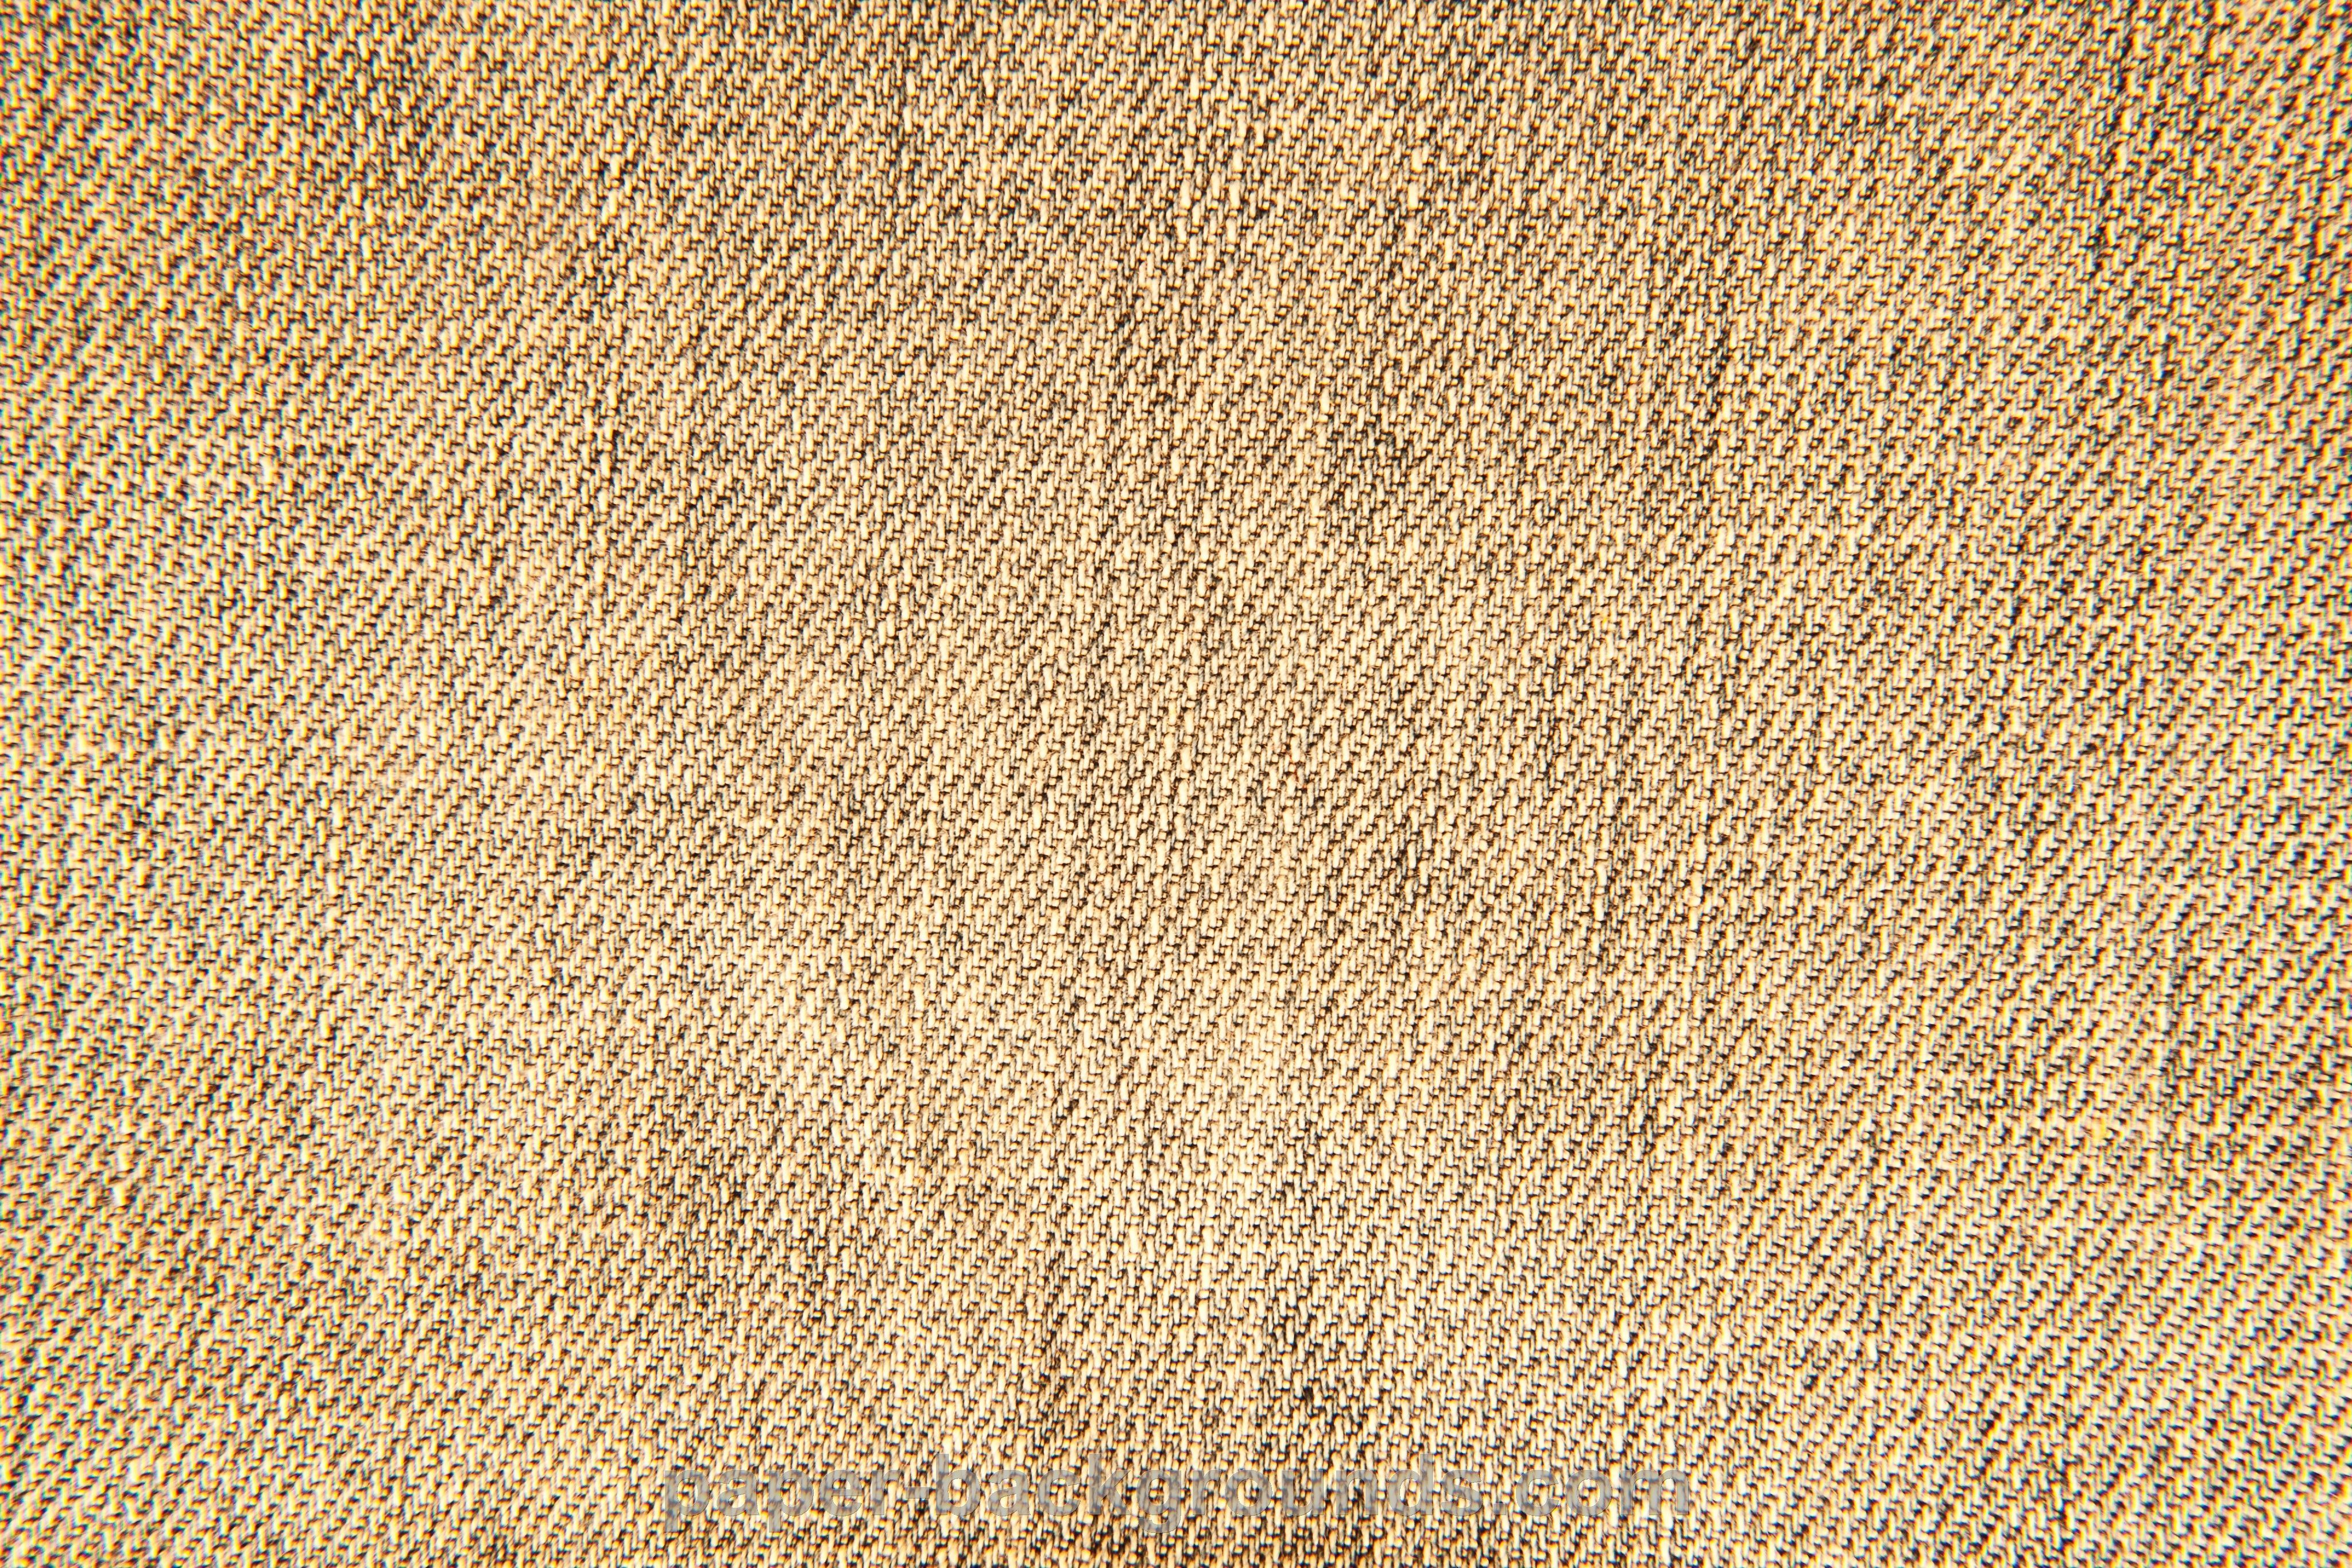 Brown Fabric Texture Background High Resolution | Paper ...